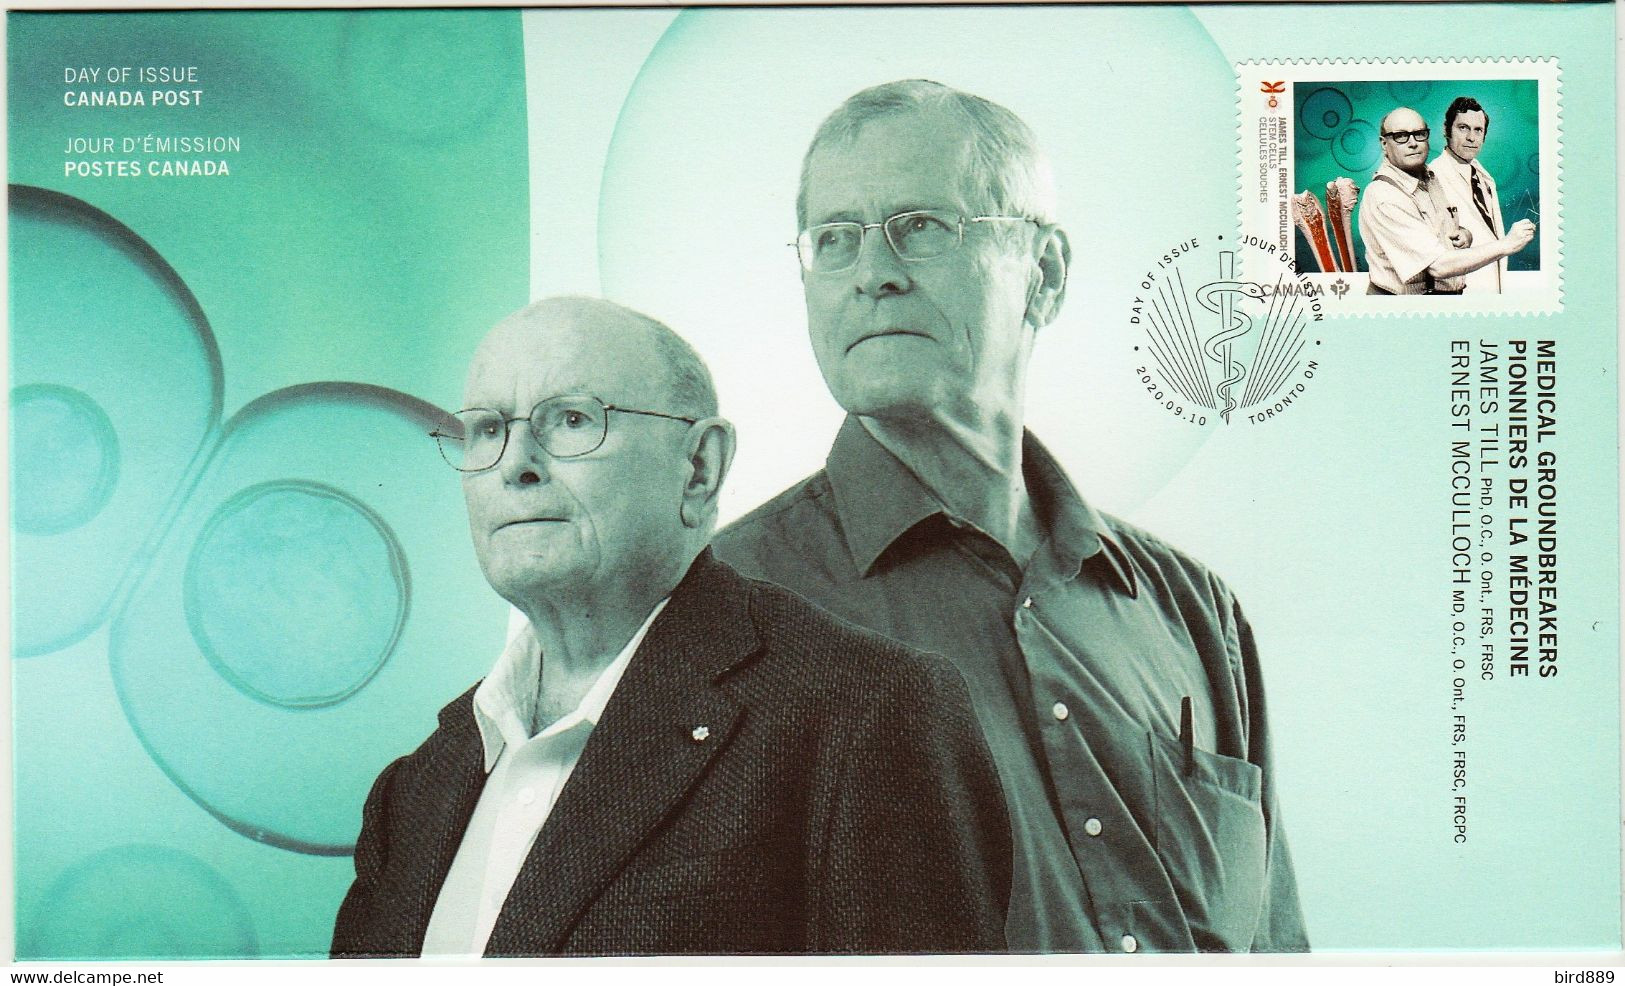 2020 Canada Medical Ground-breakers Dr. Till And Dr. McCulloch Stem Cell FDC - 2011-...